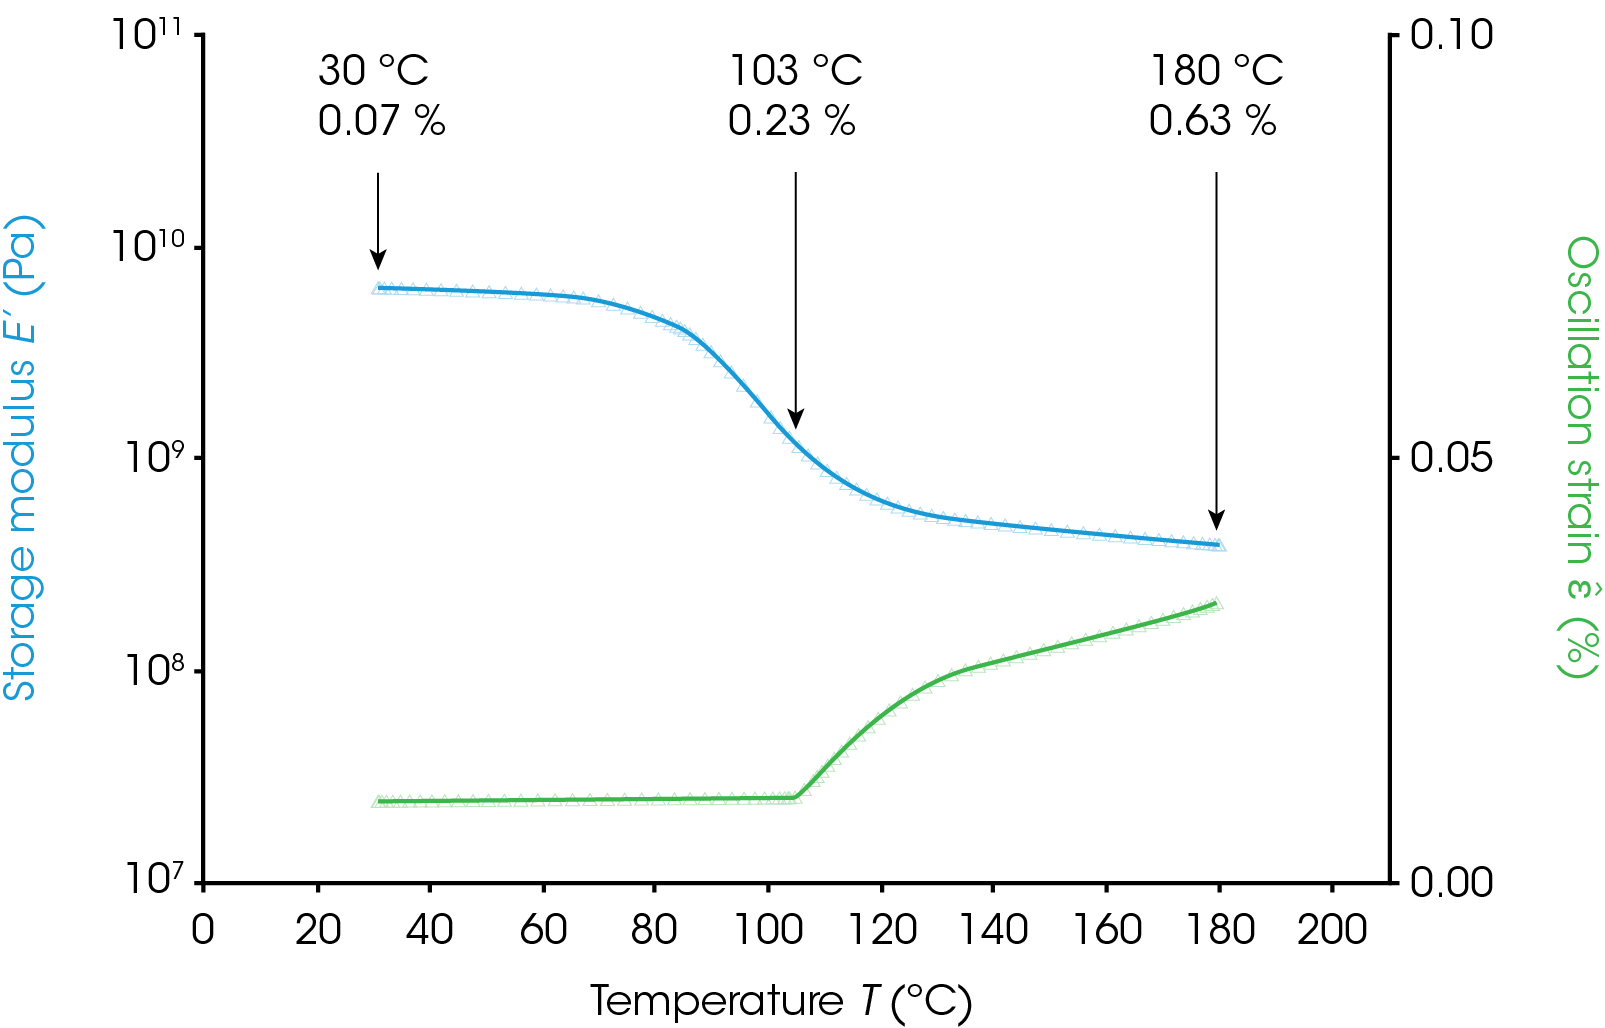 Figure 7. Temperature ramp of PETE film on the RSA-G2 with E’ (blue) and the applied oscillation strain (green). The critical strain from separate experiments are labelled in three regions: glassy region (30 °C) 0.07%, transition region (103 °C) 0.23%, and rubbery plateau (180 °C) 0.63%. The strain settings automatically increase the strain to maintain a minimum force so that data quality doesn’t suffer. The oscillation strain does not approach the critical strain of the material at any time.